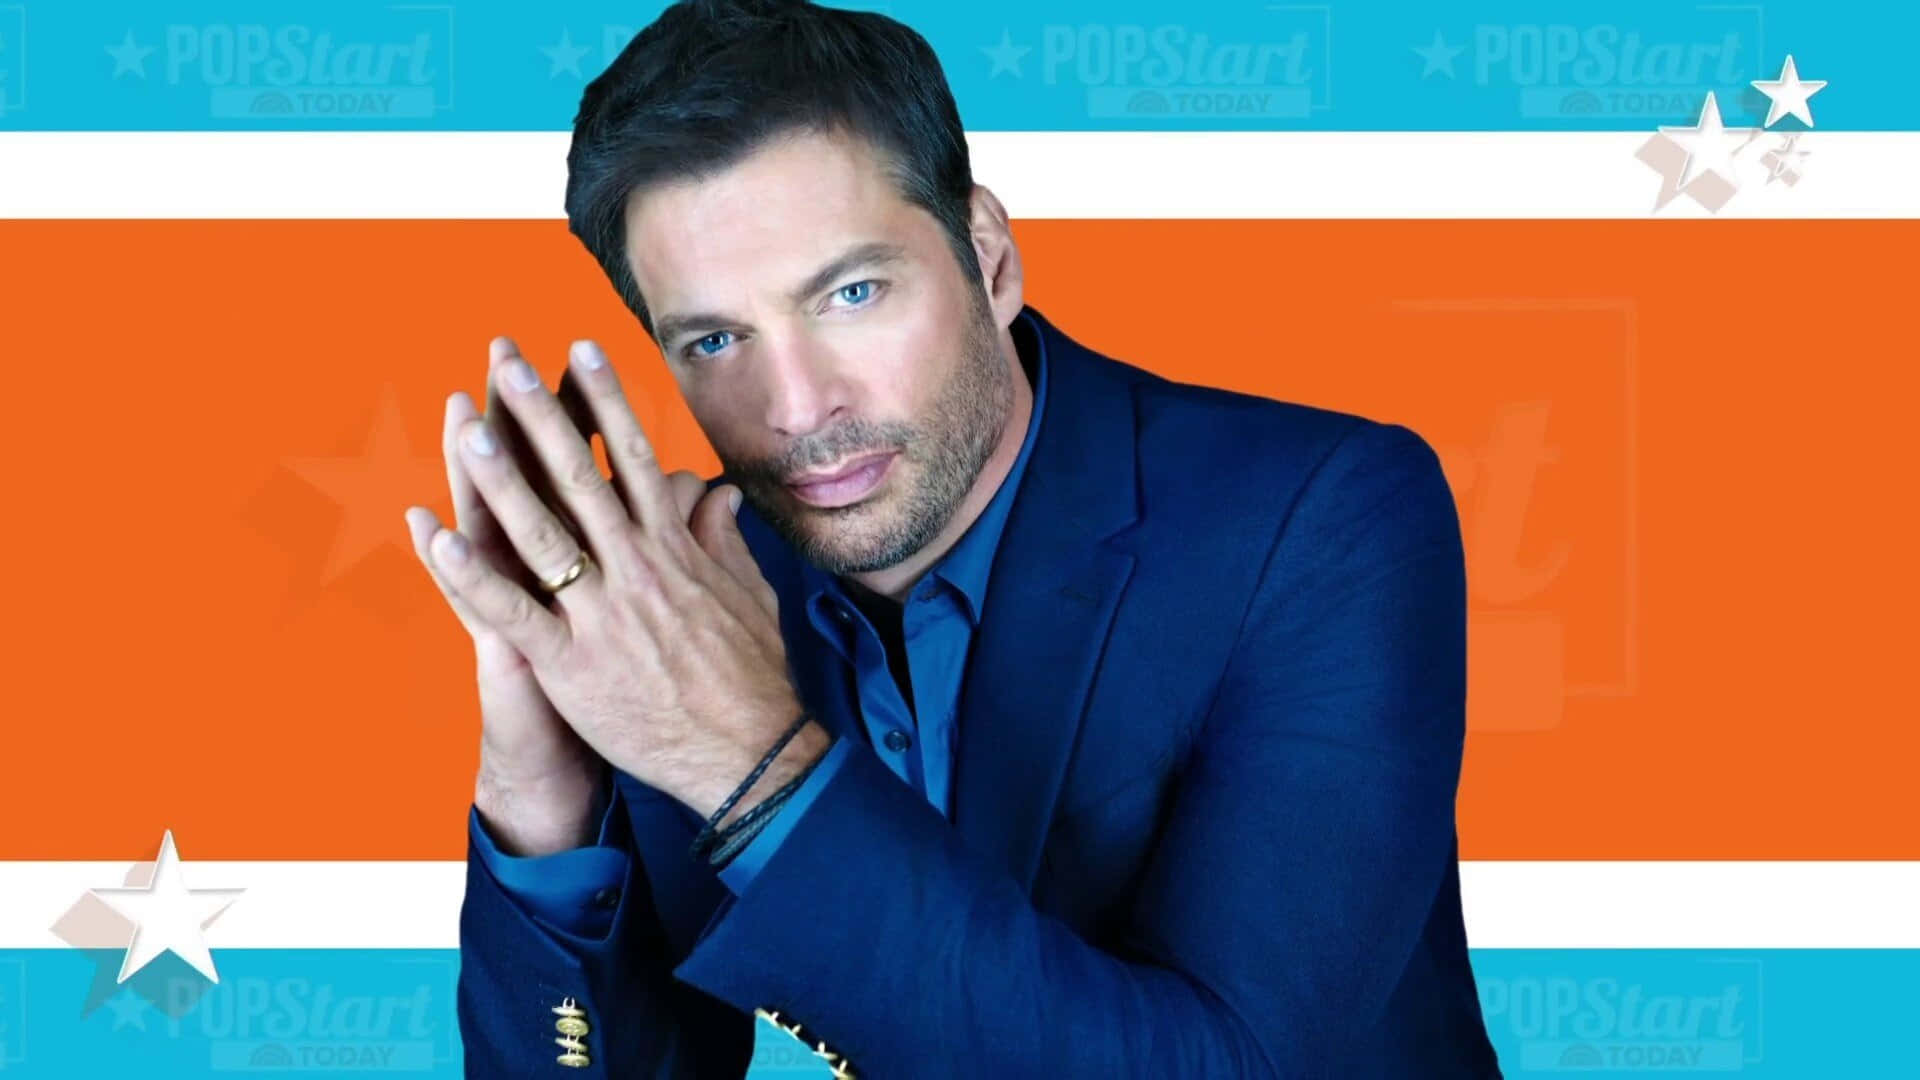 Harry Connick Jr. in a dapper suit, standing confidently against a simple background Wallpaper